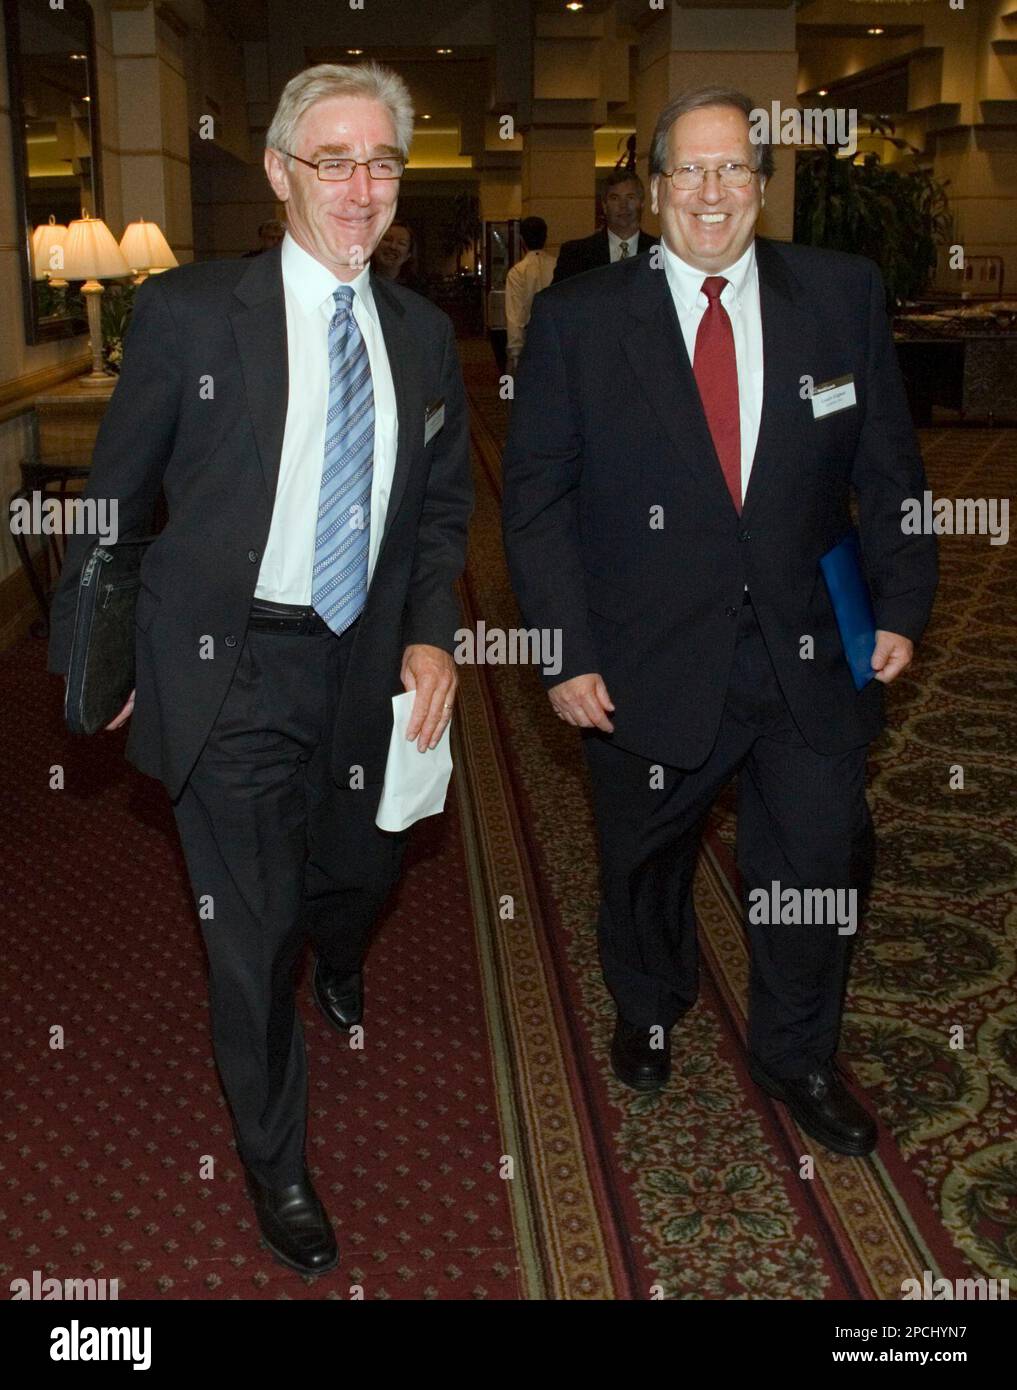 Iamgold CEO Joseph Conway, left, and Louis Gignac, CEO of Montreal-based Cambior leave a presentation in Toronto, Thursday, Sept. 14, 2006. IAMGold Corp. said Thursday it is buying a rival Canadian miner, Cambior Inc., for $1.1 billion in stock to create a company capable of producing more than 1 million ounces of gold per year. (AP Photo/CP, Adrian Wyld) Stock Photo